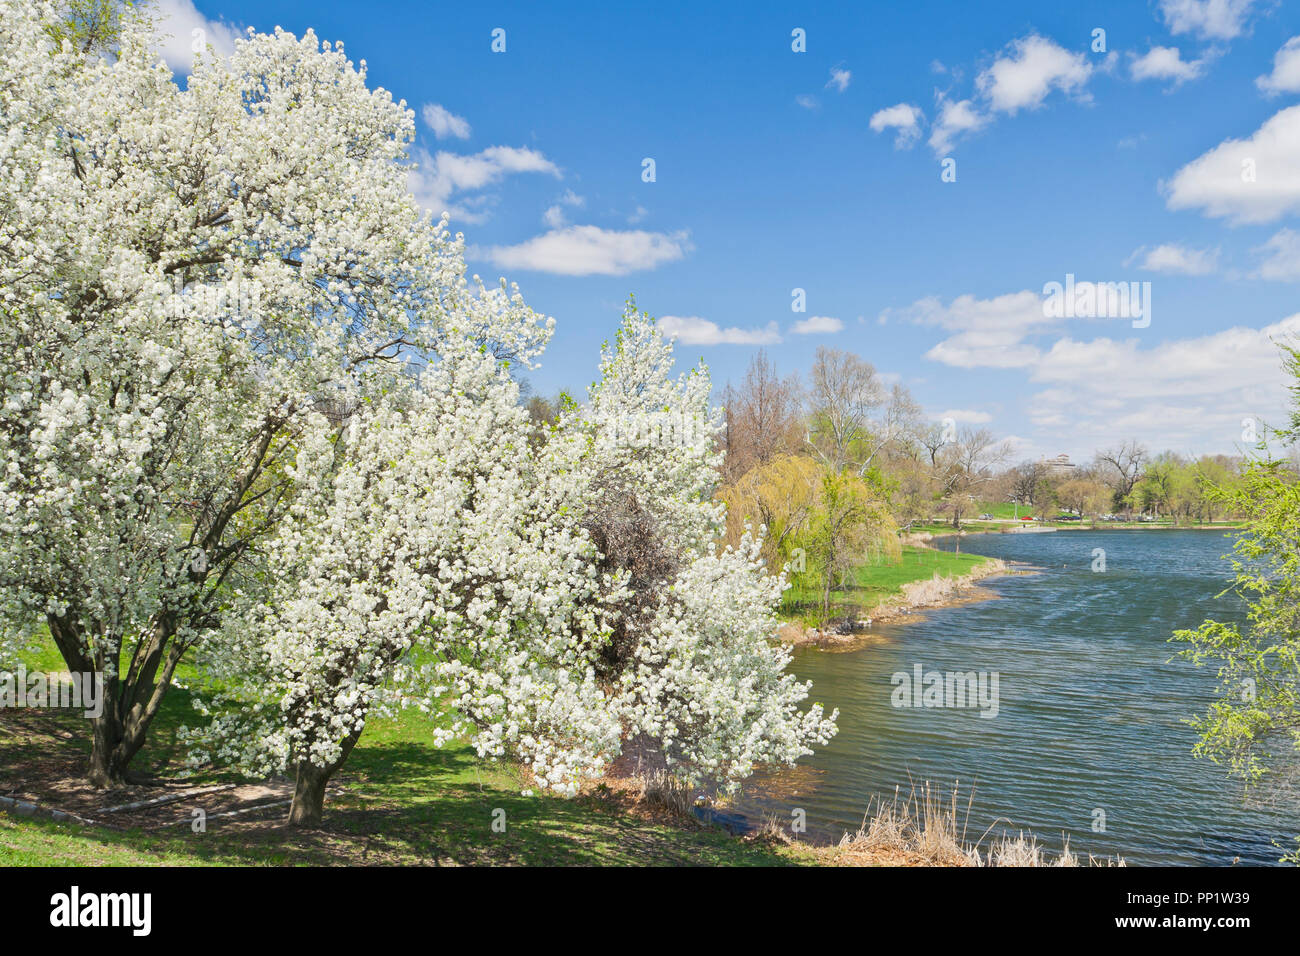 The white flowers of pear trees next to Jefferson Lake glowing in the sunshine at St. Louis Forest Park on a spring day. Stock Photo